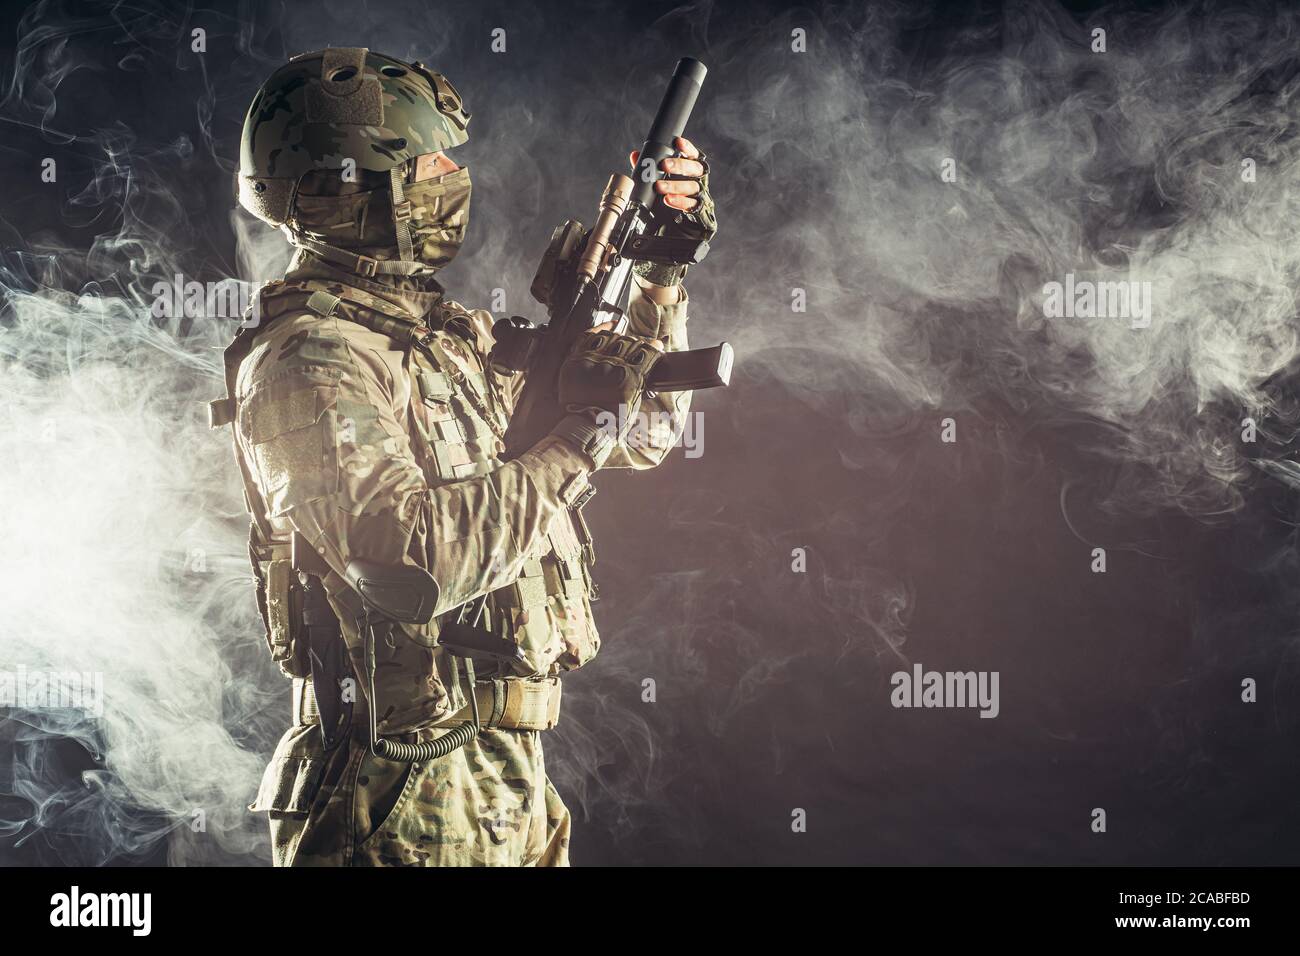 young military, soldier man holding gun wearing military wear, green camouflage and helmet on head, combatant Stock Photo